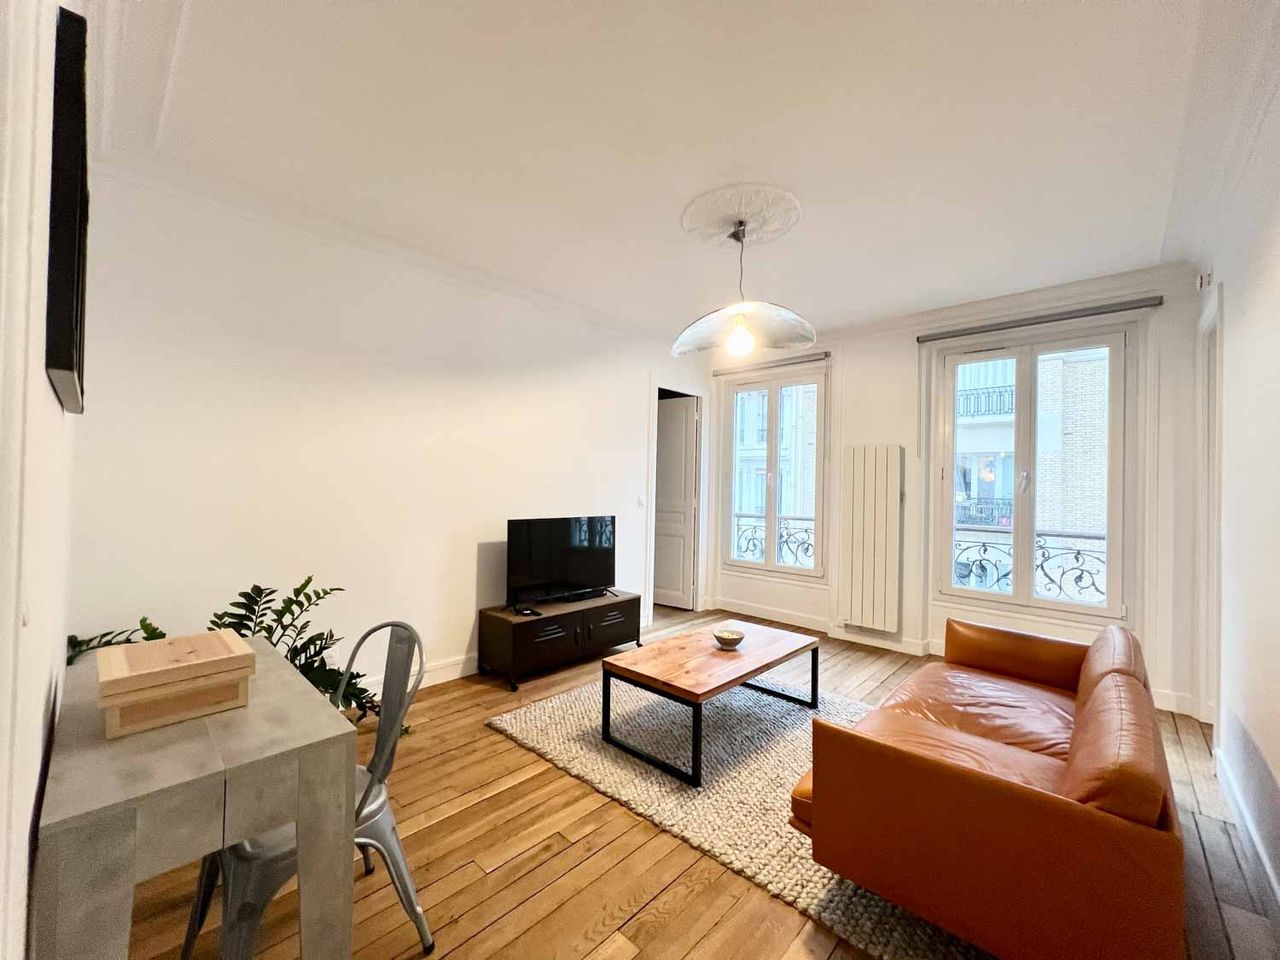 A Charming 3-Room Apartment in the Heart of the 11th Arrondissement - Newly Renovated with Style